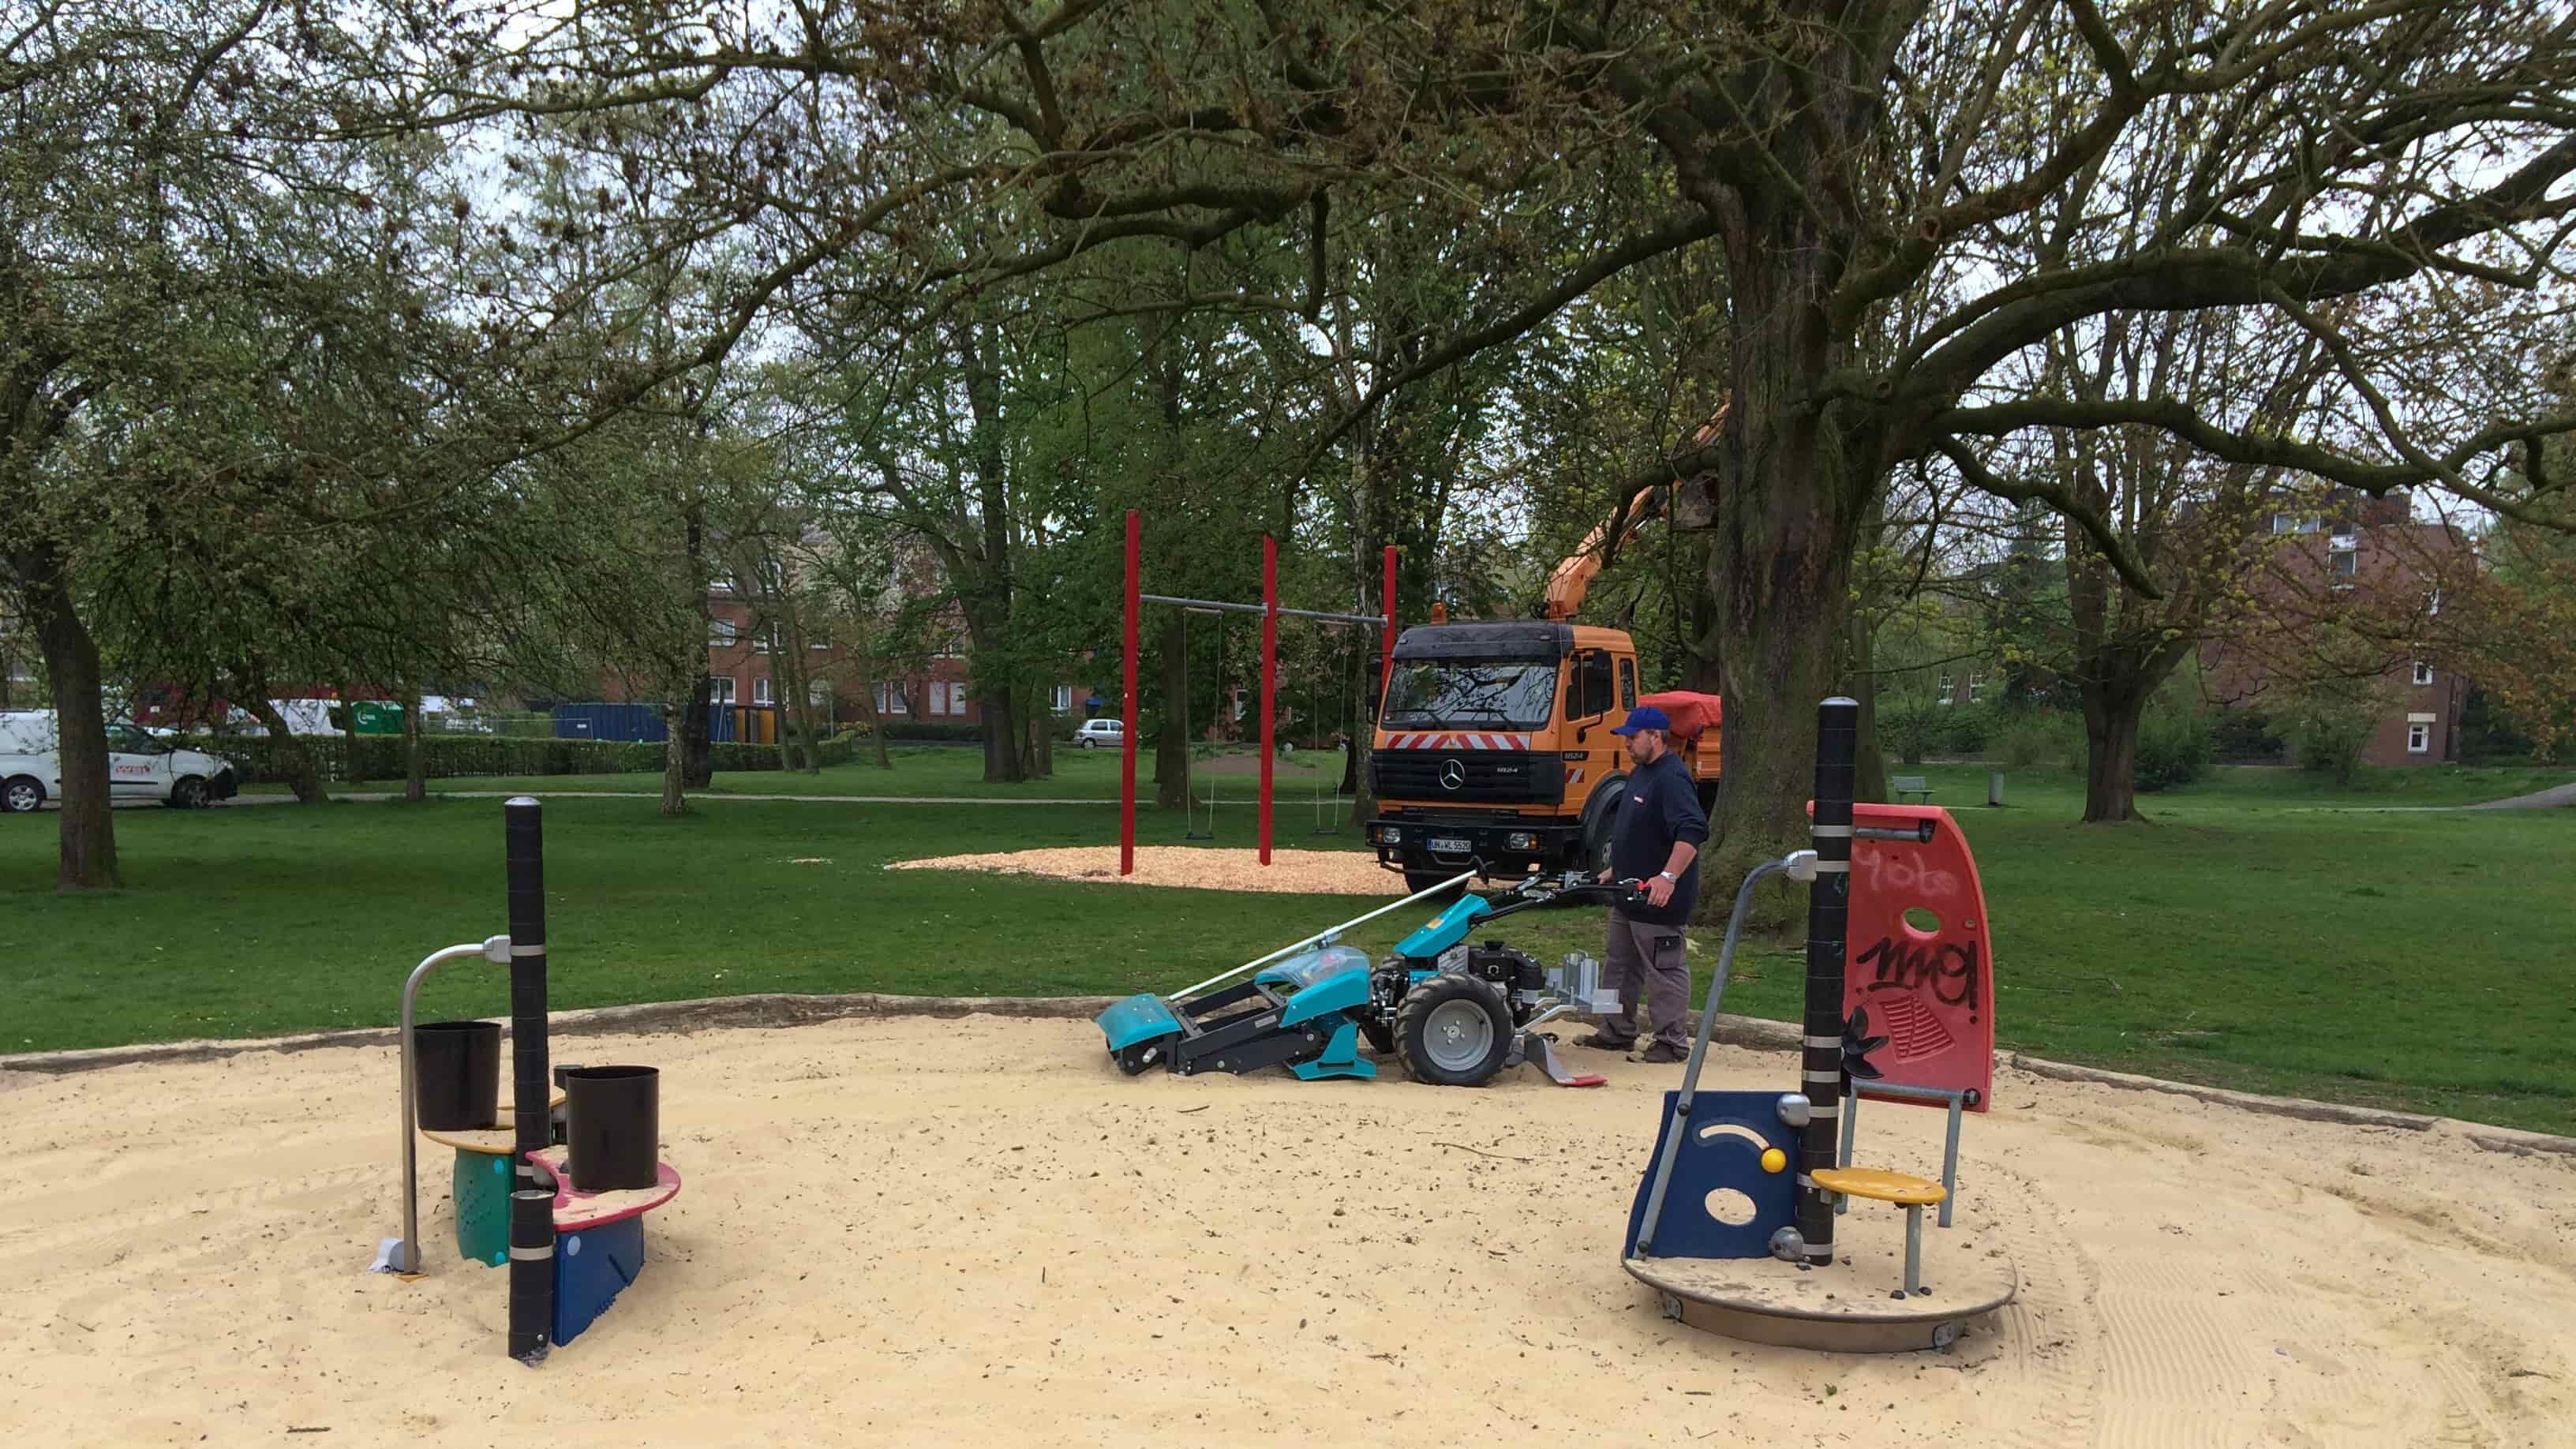 The BeachTech Sweepy thoroughly cleans play areas and sports areas.